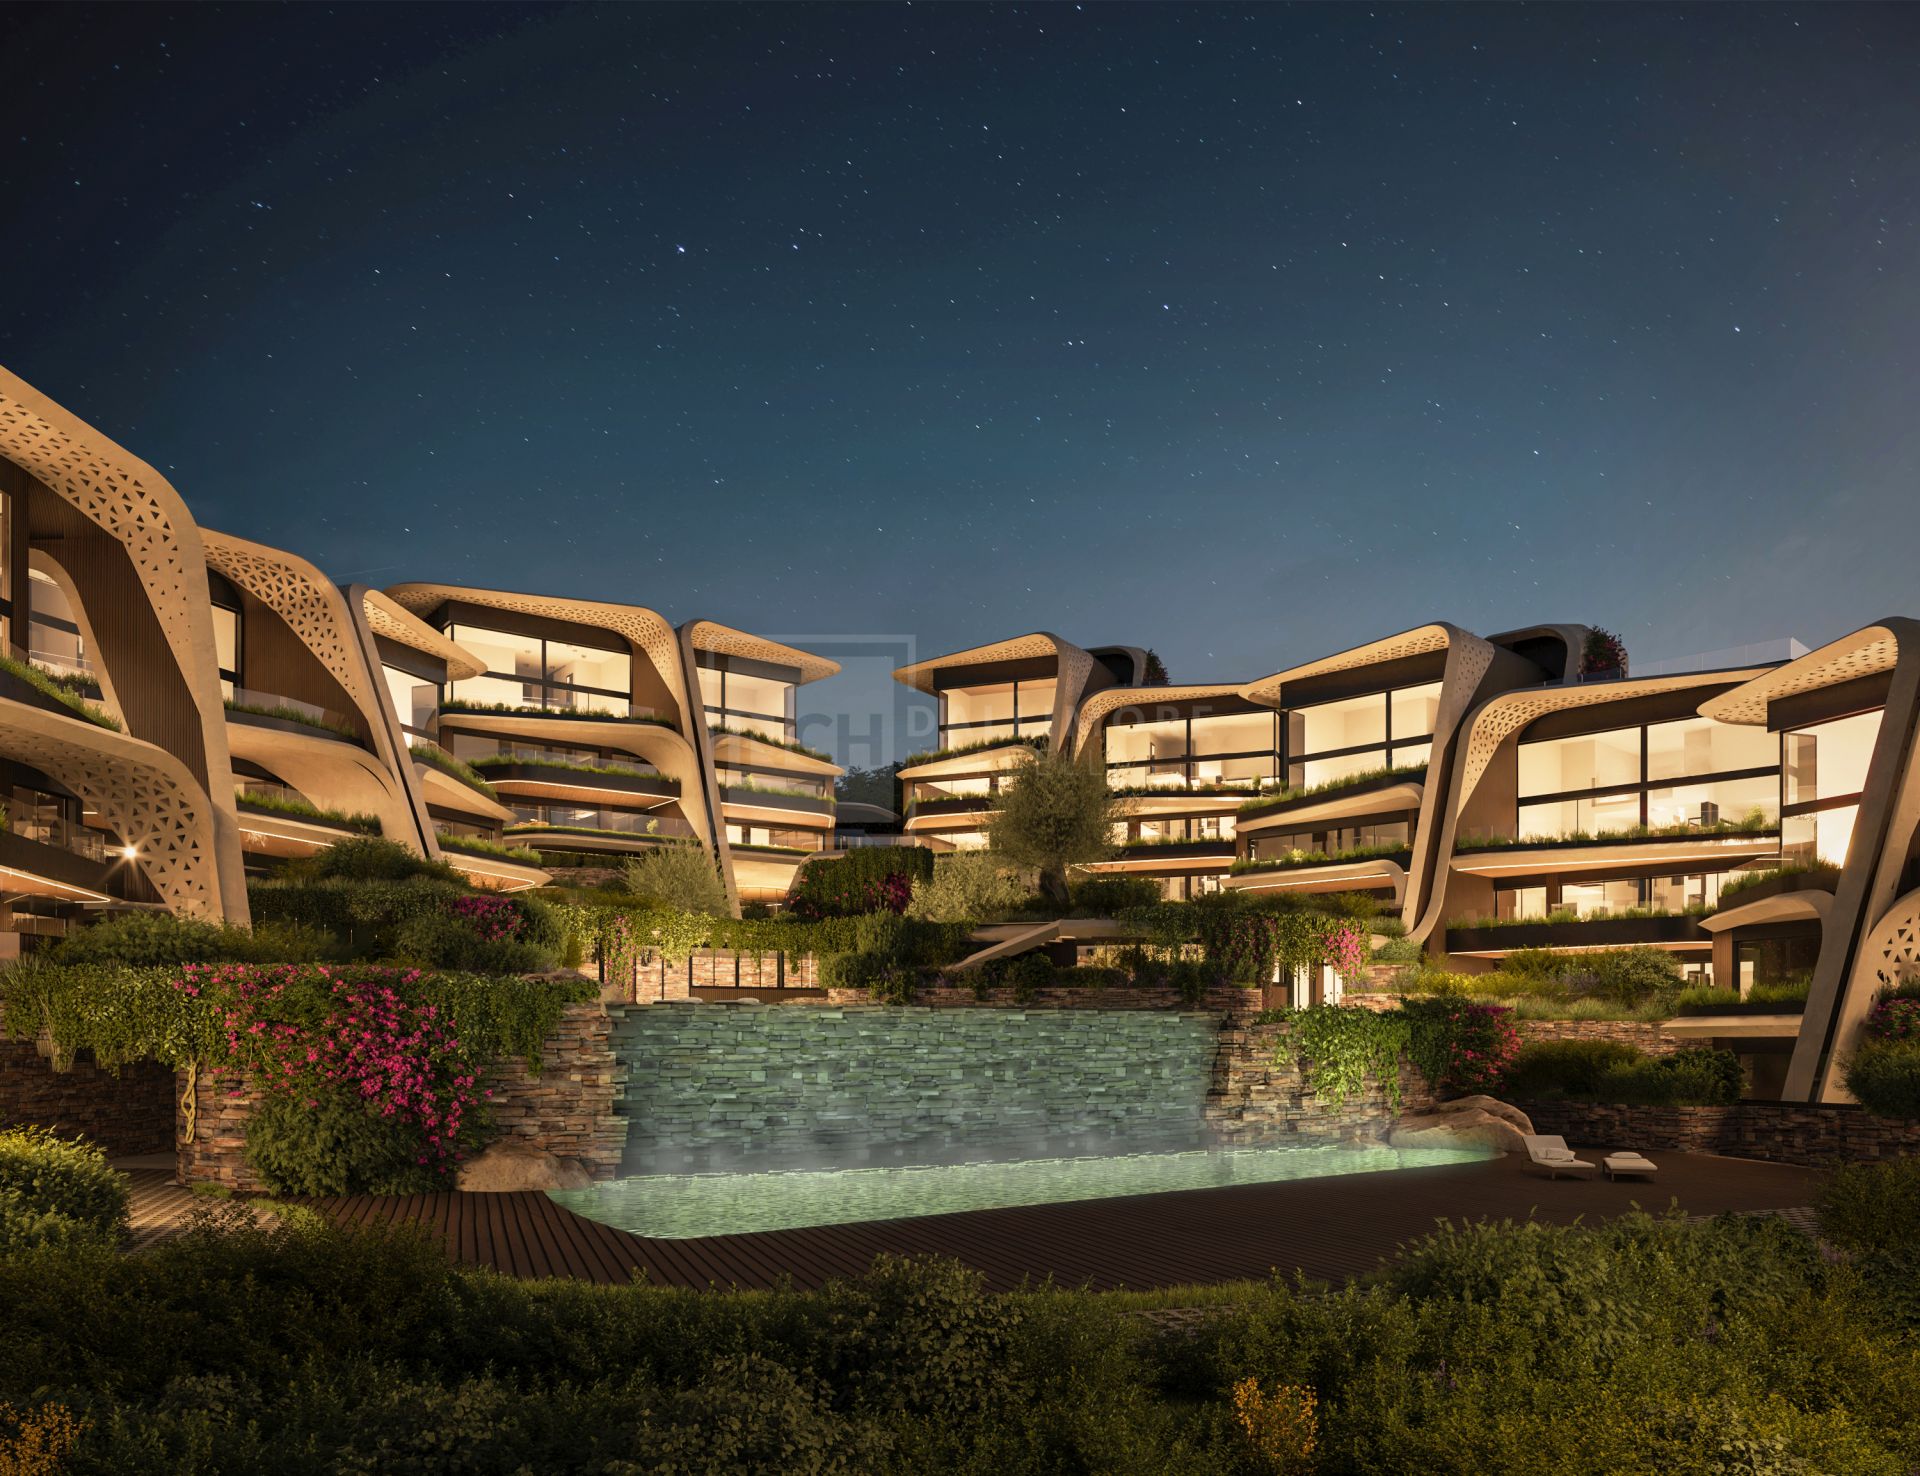 LUXURIOUS 4 BEDROOM CONTEMPORARY LUXURY APARTMENT WITHIN SUSTAINABLE DEVELOPMENT SOTOGRANDE